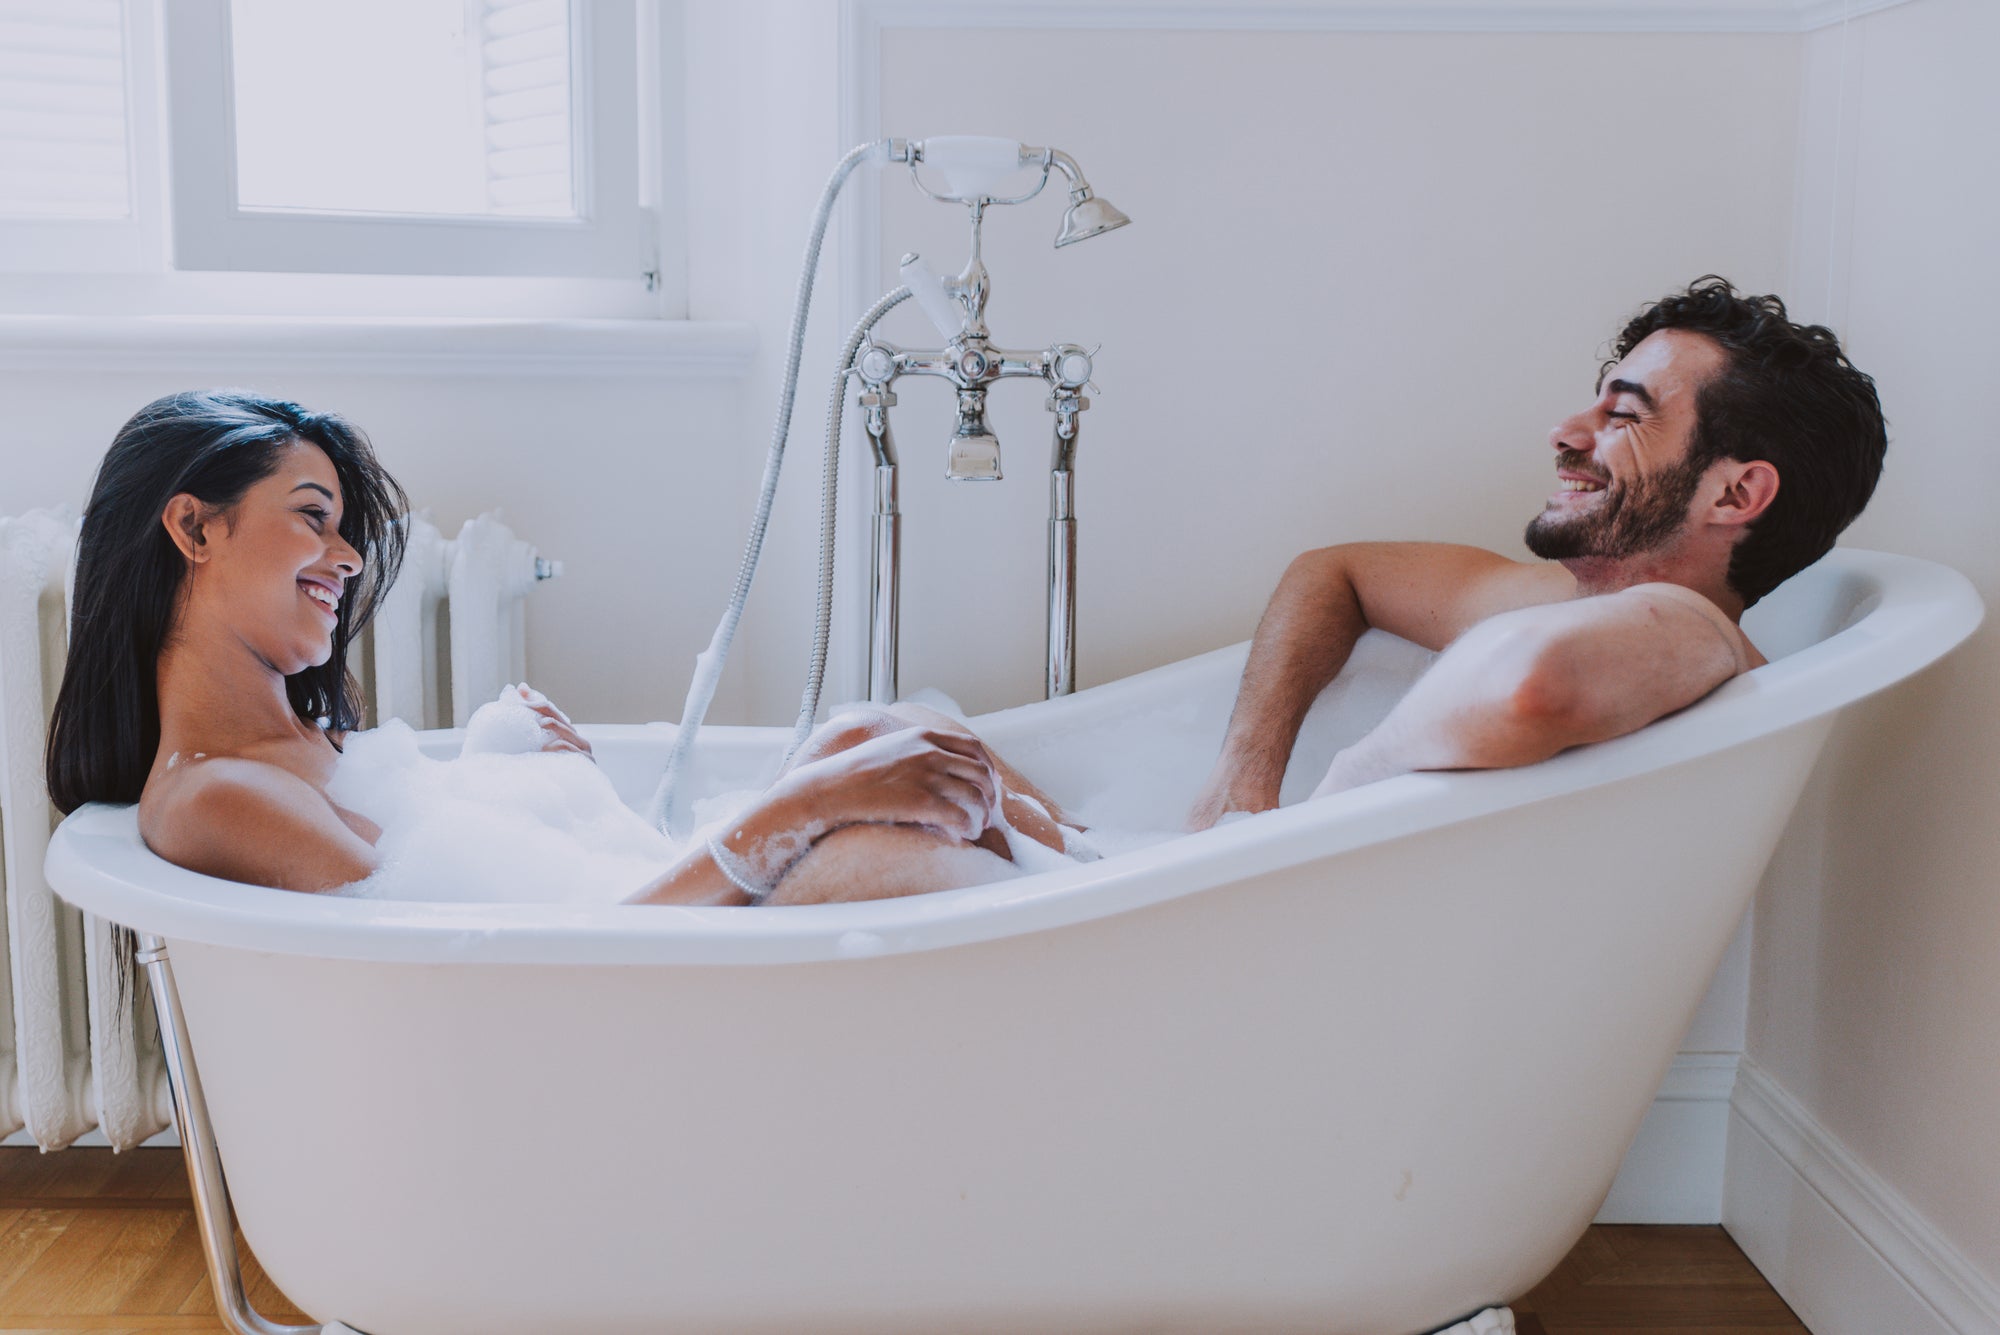 Man and woman in bubble bath